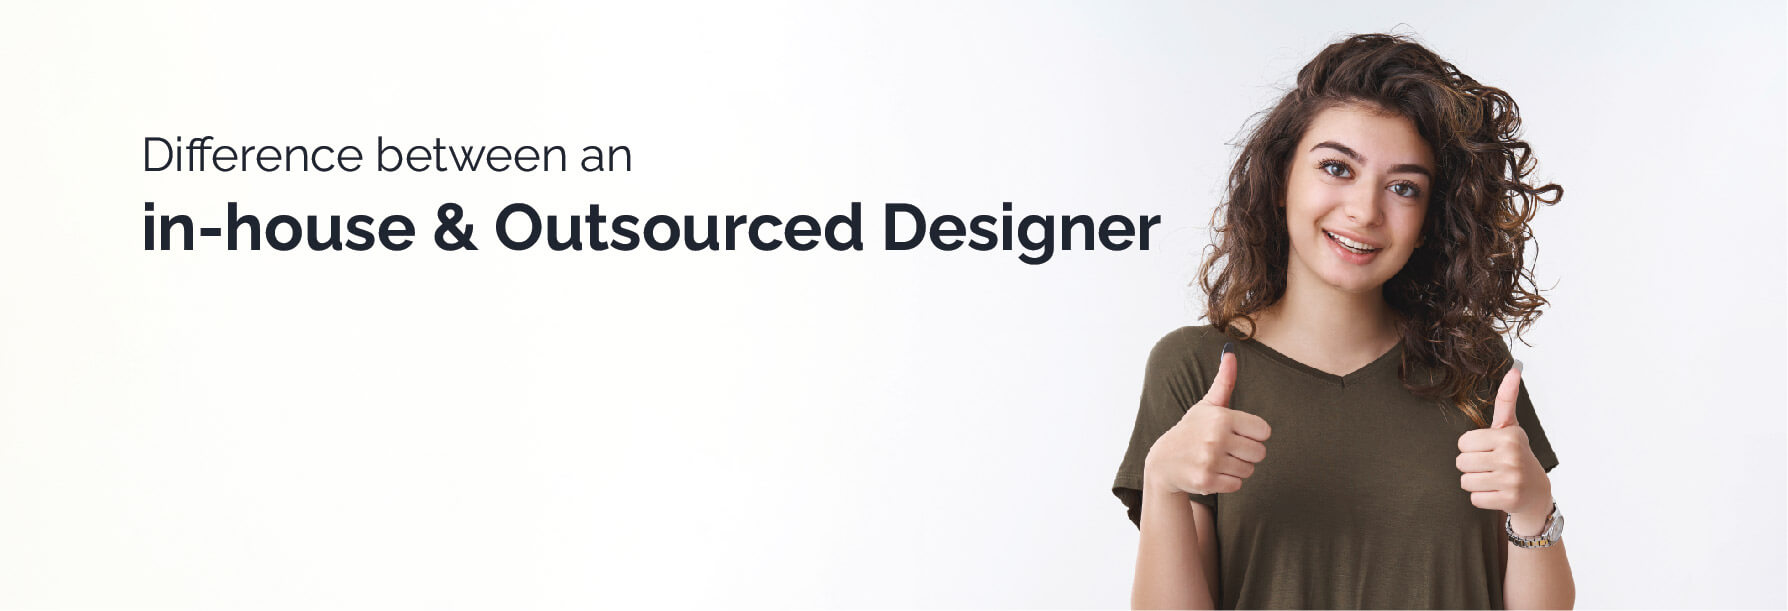 Difference between an in-house and outsourced designer